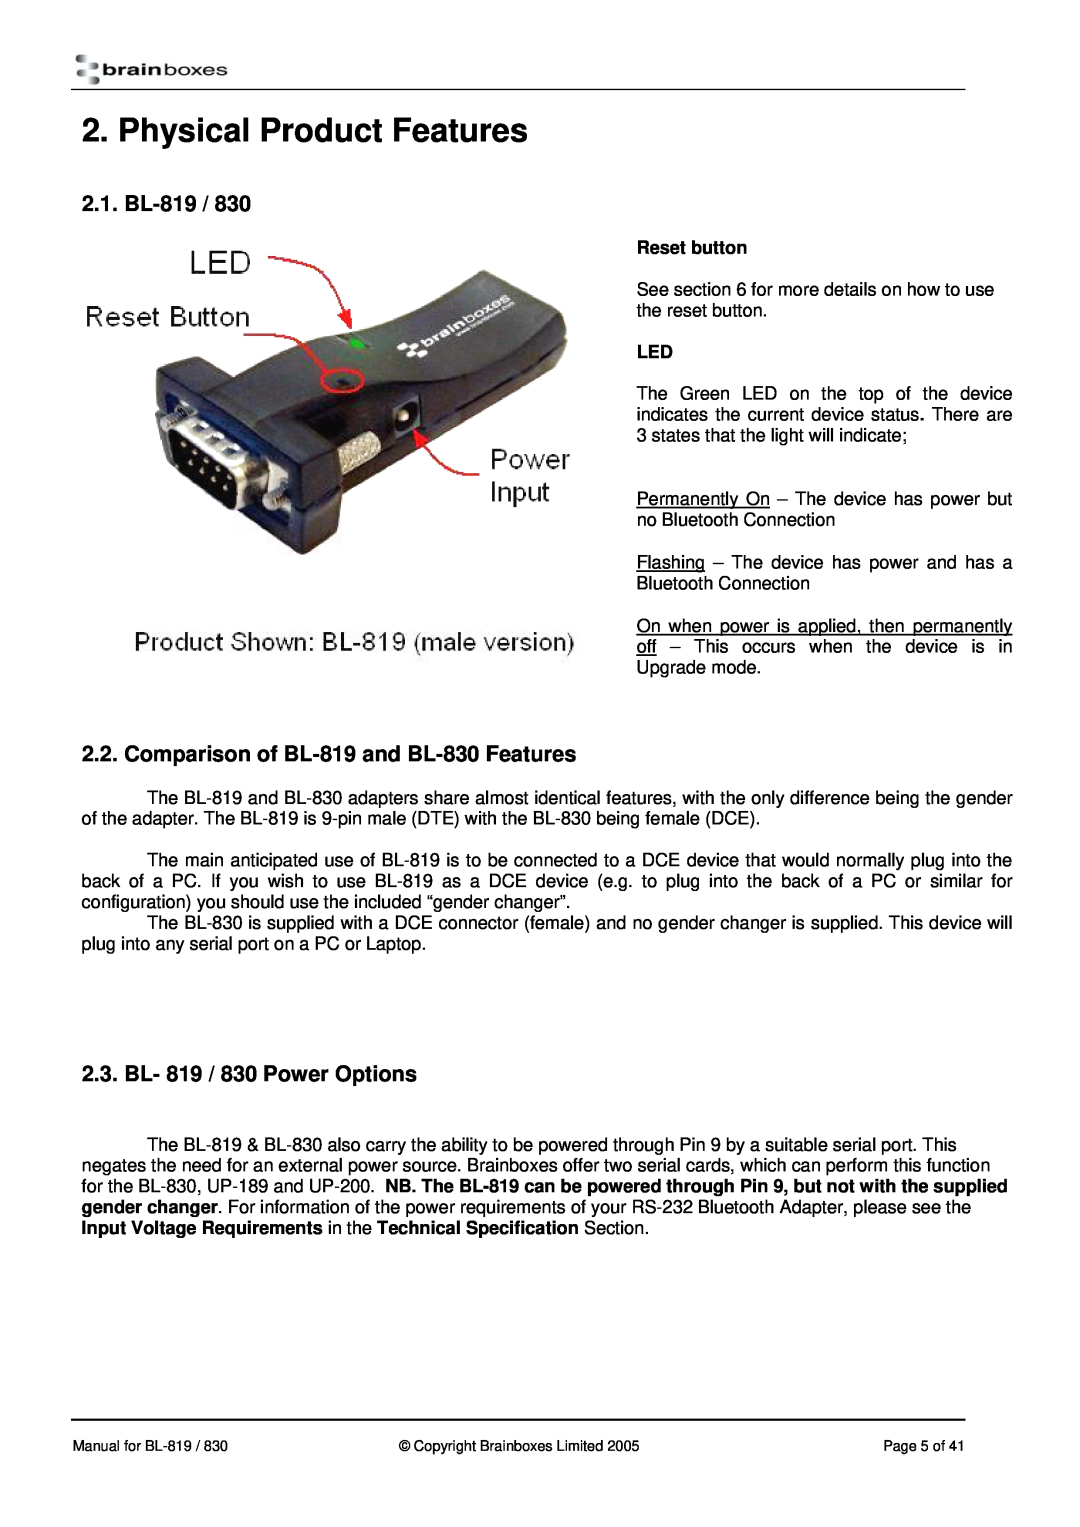 Brainboxes manual Physical Product Features, Comparison of BL-819 and BL-830 Features, BL- 819 / 830 Power Options 